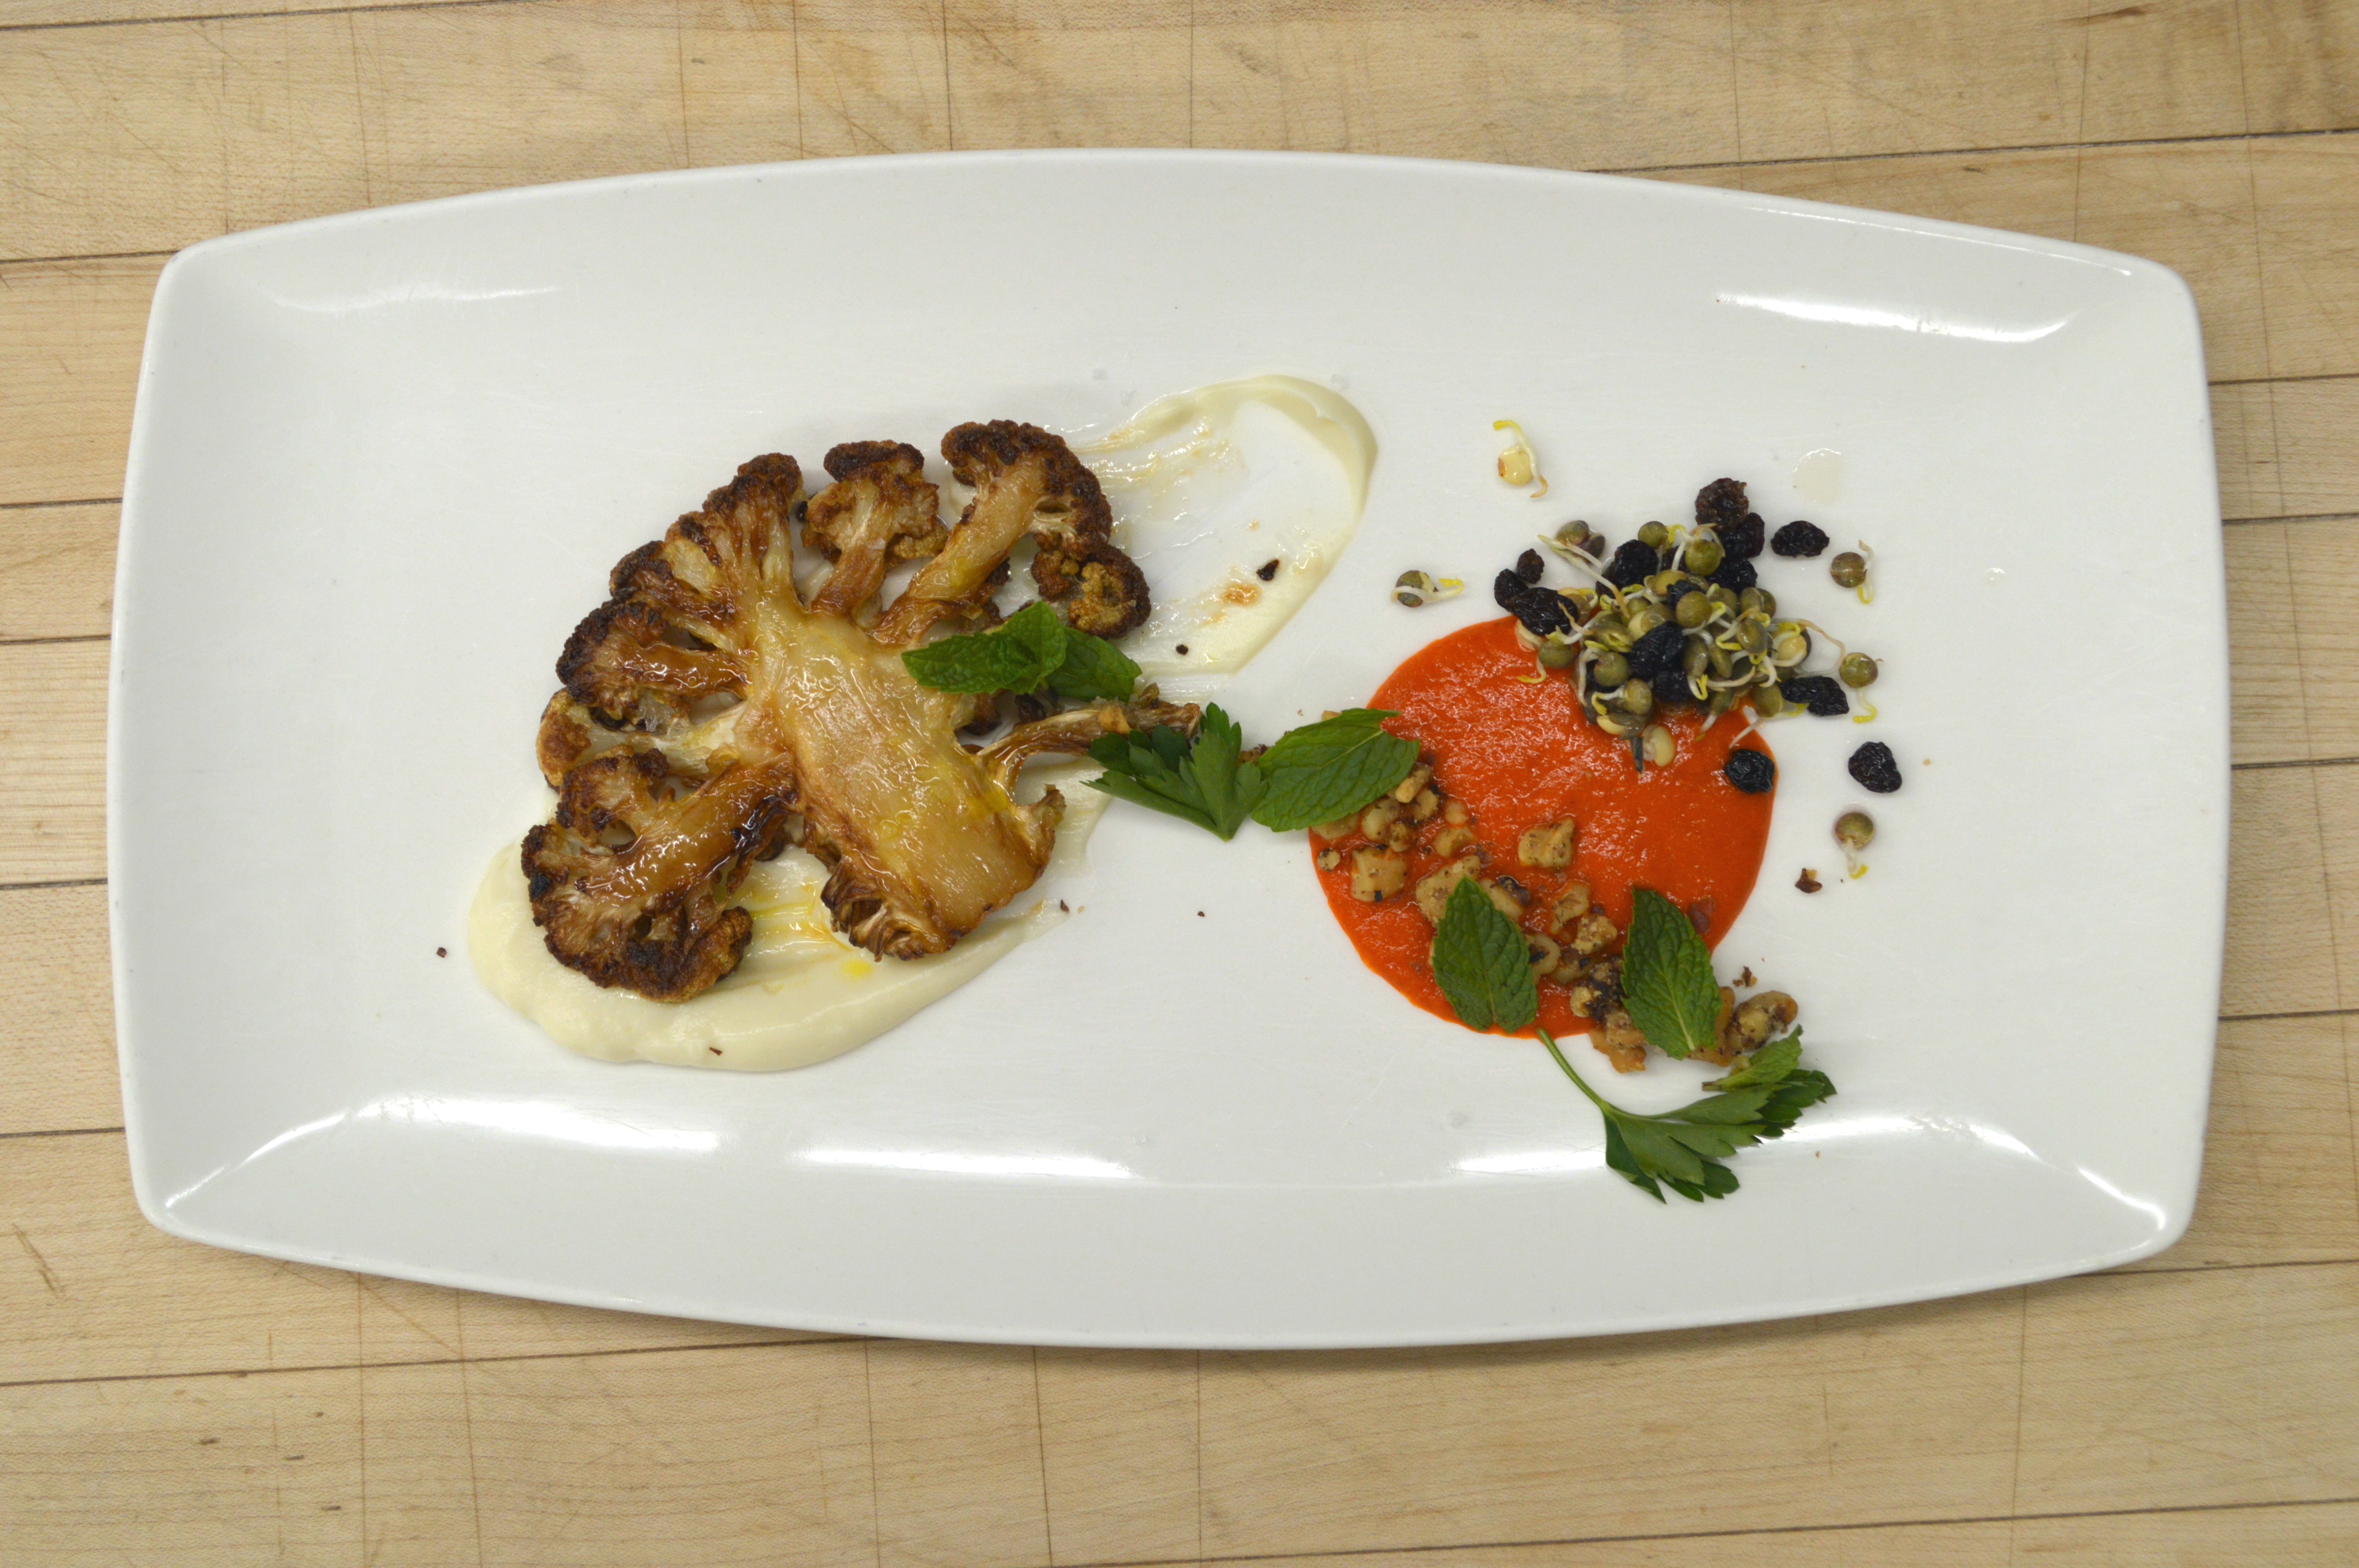 A dish of roasted cauliflower, red peper, walnut, currant, sprouted lentil, and mint.